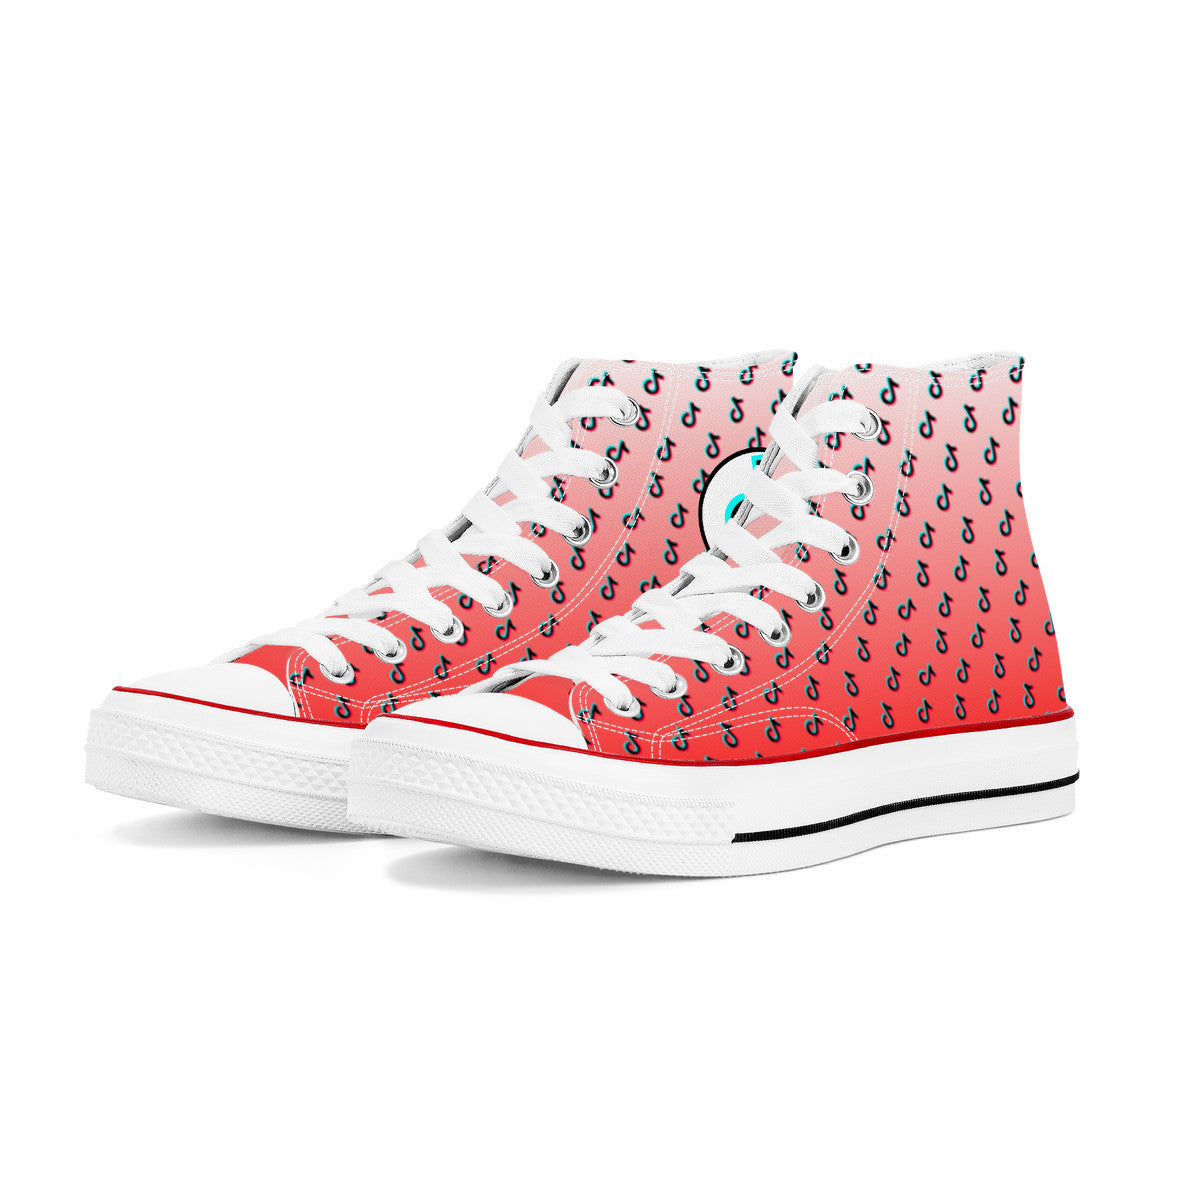 TikTok High Top Canvas Shoes - Red TikTok Sneakers - SD-style-shop